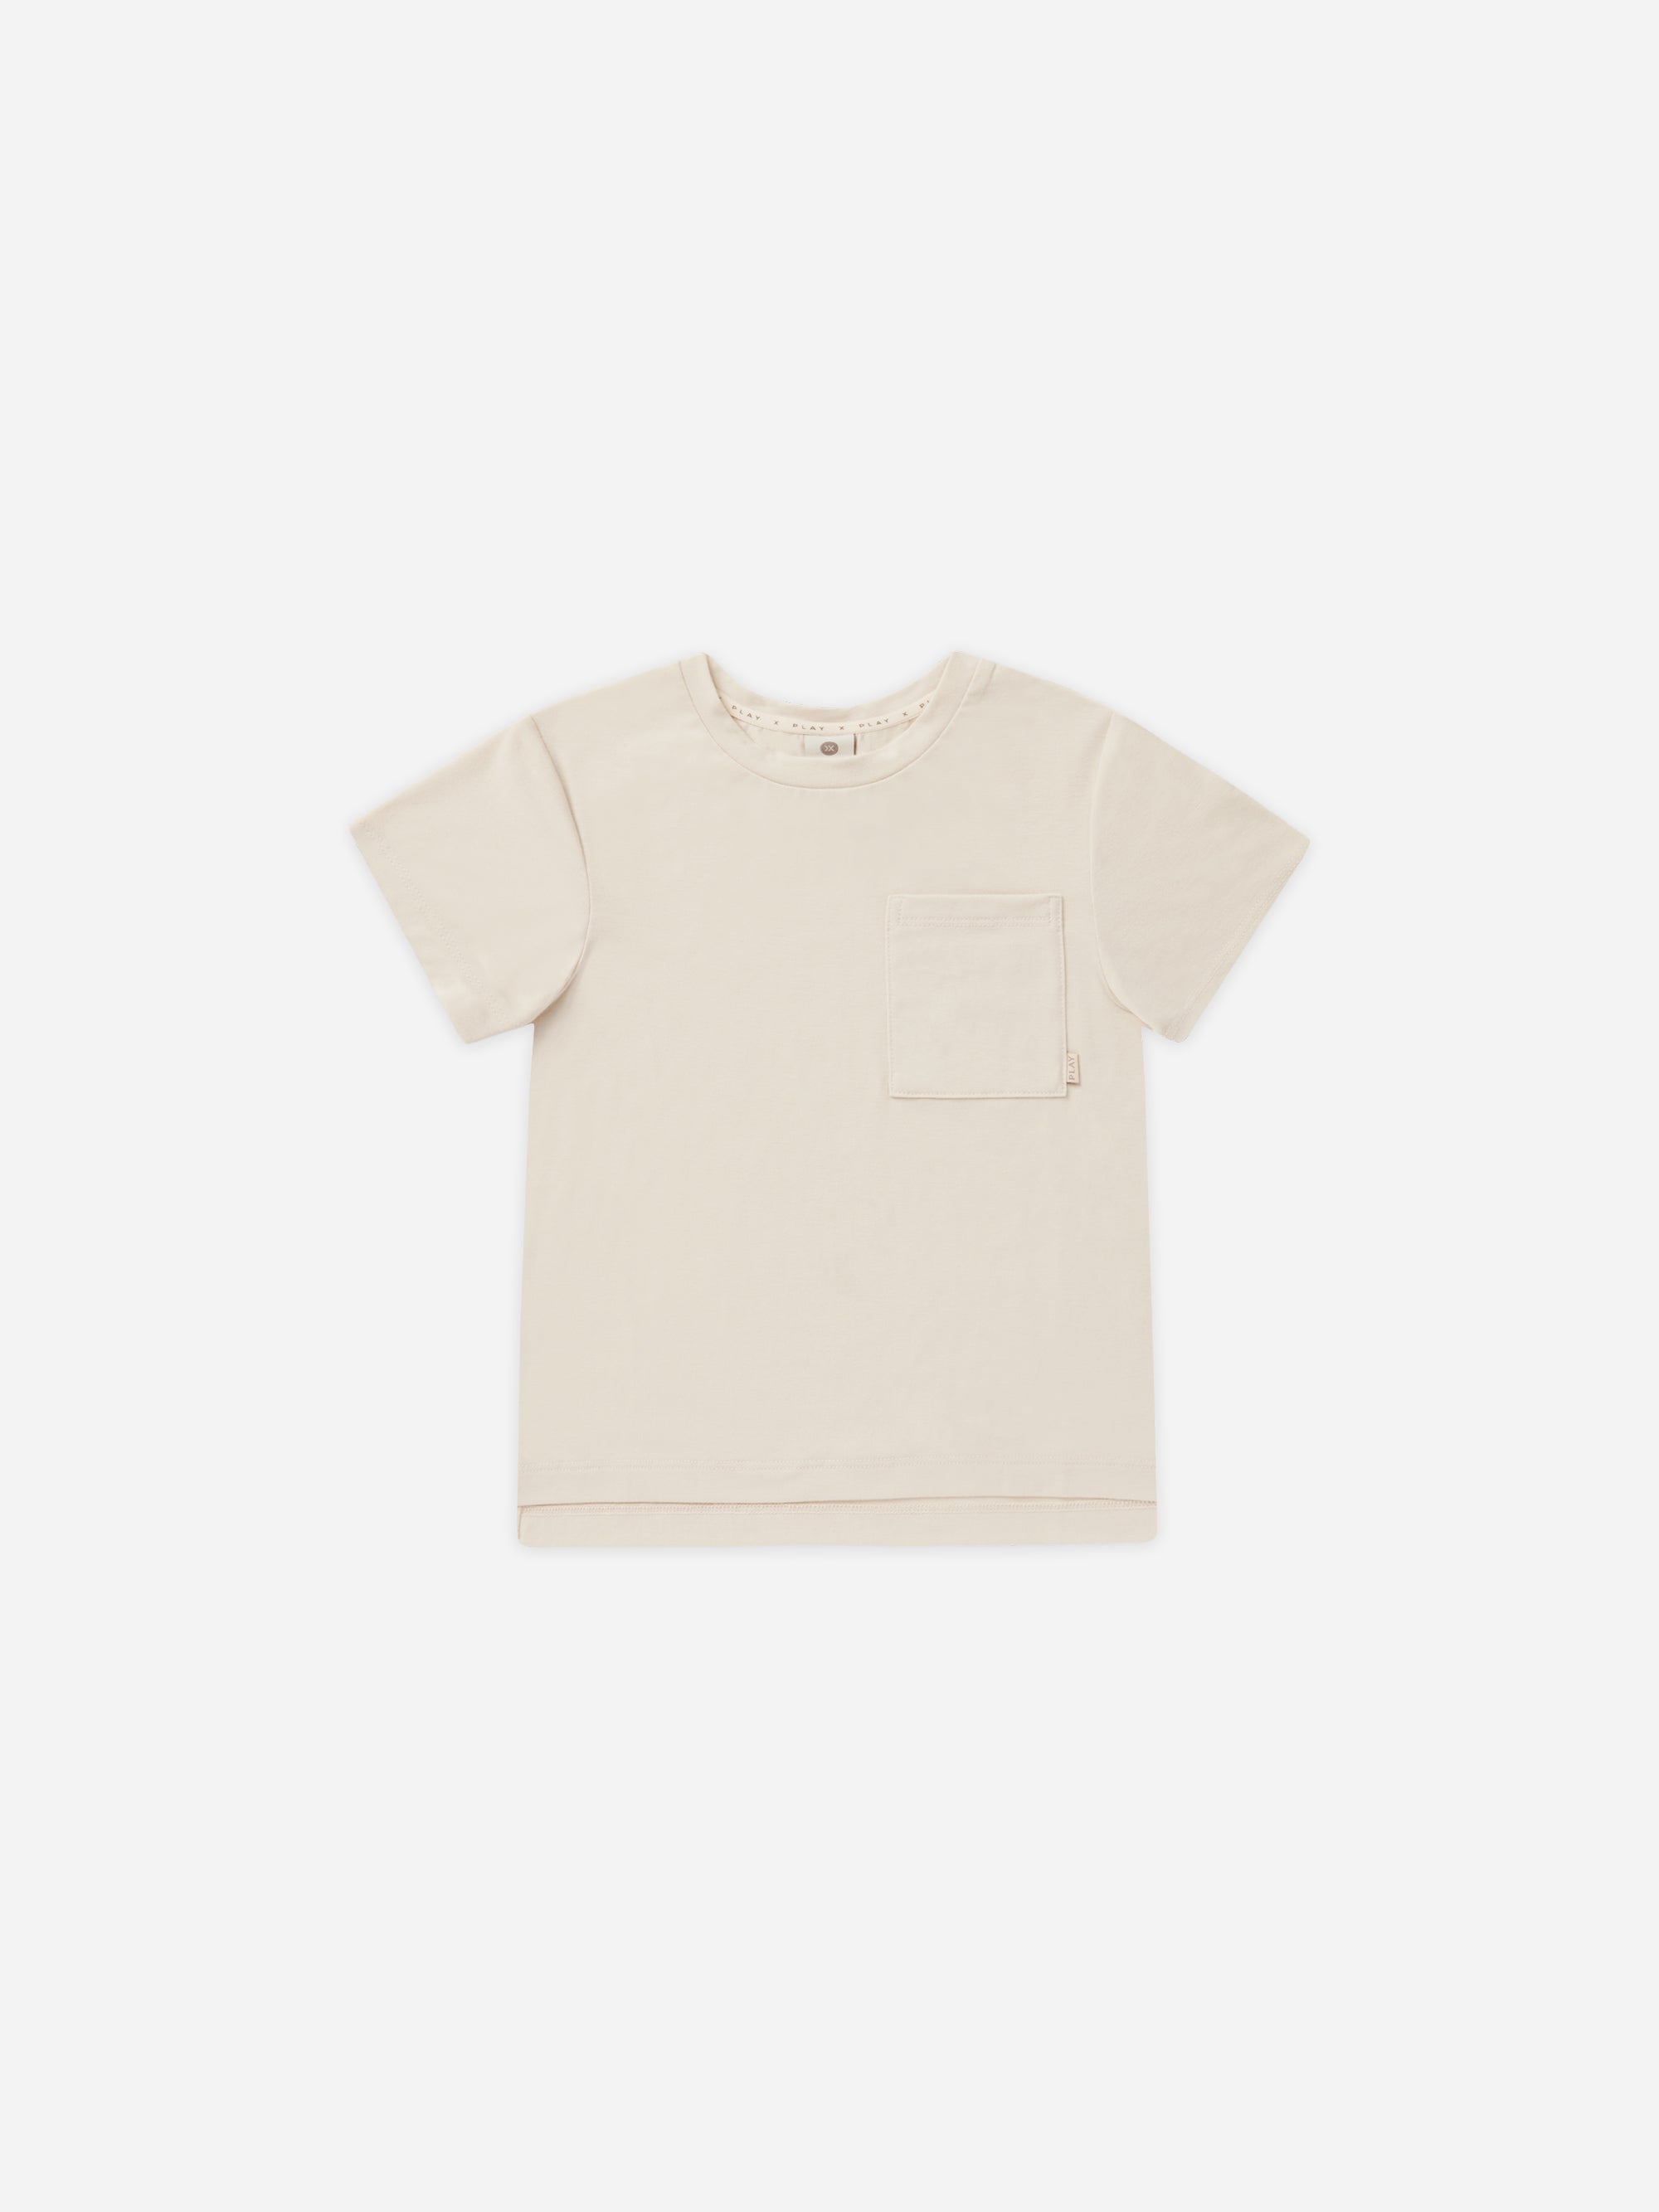 Cove Essential Pocket Tee || Stone - Rylee + Cru | Kids Clothes | Trendy Baby Clothes | Modern Infant Outfits |